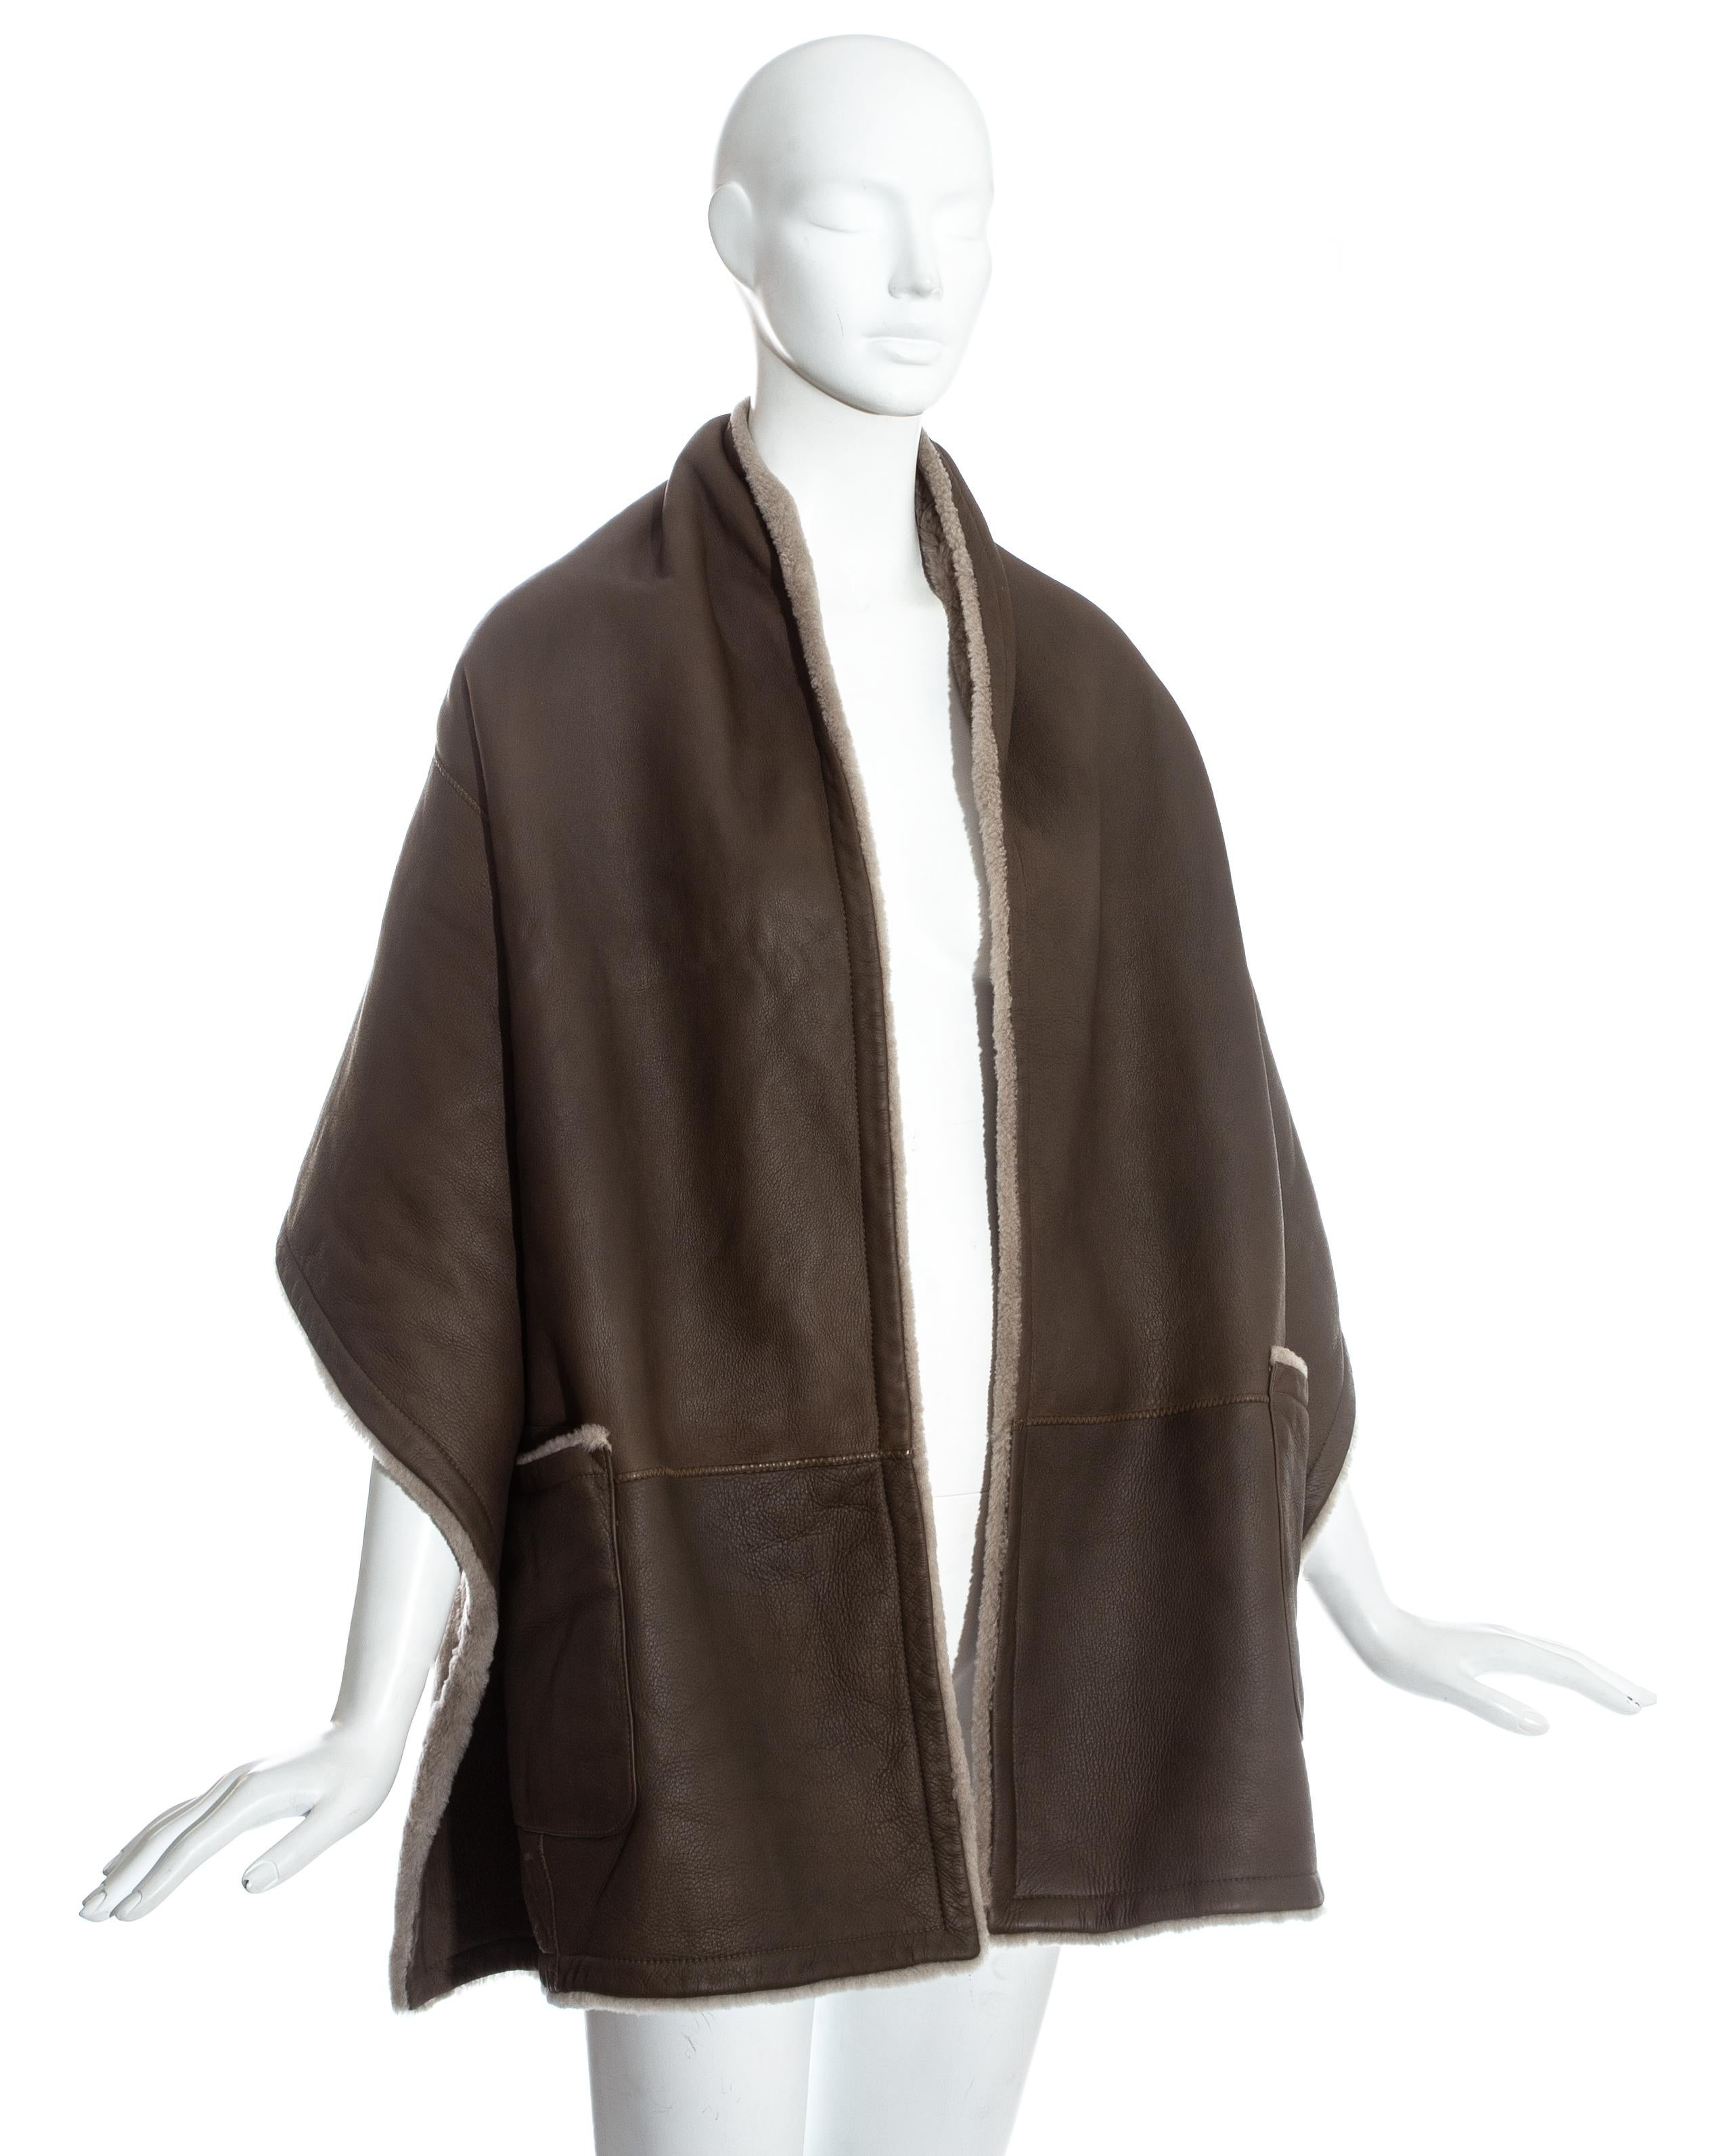 Hermes by Martin Margiela; mushroom shearling lambskin leather reversible stole. Two front patch pockets. 

Fall-Winter 1999